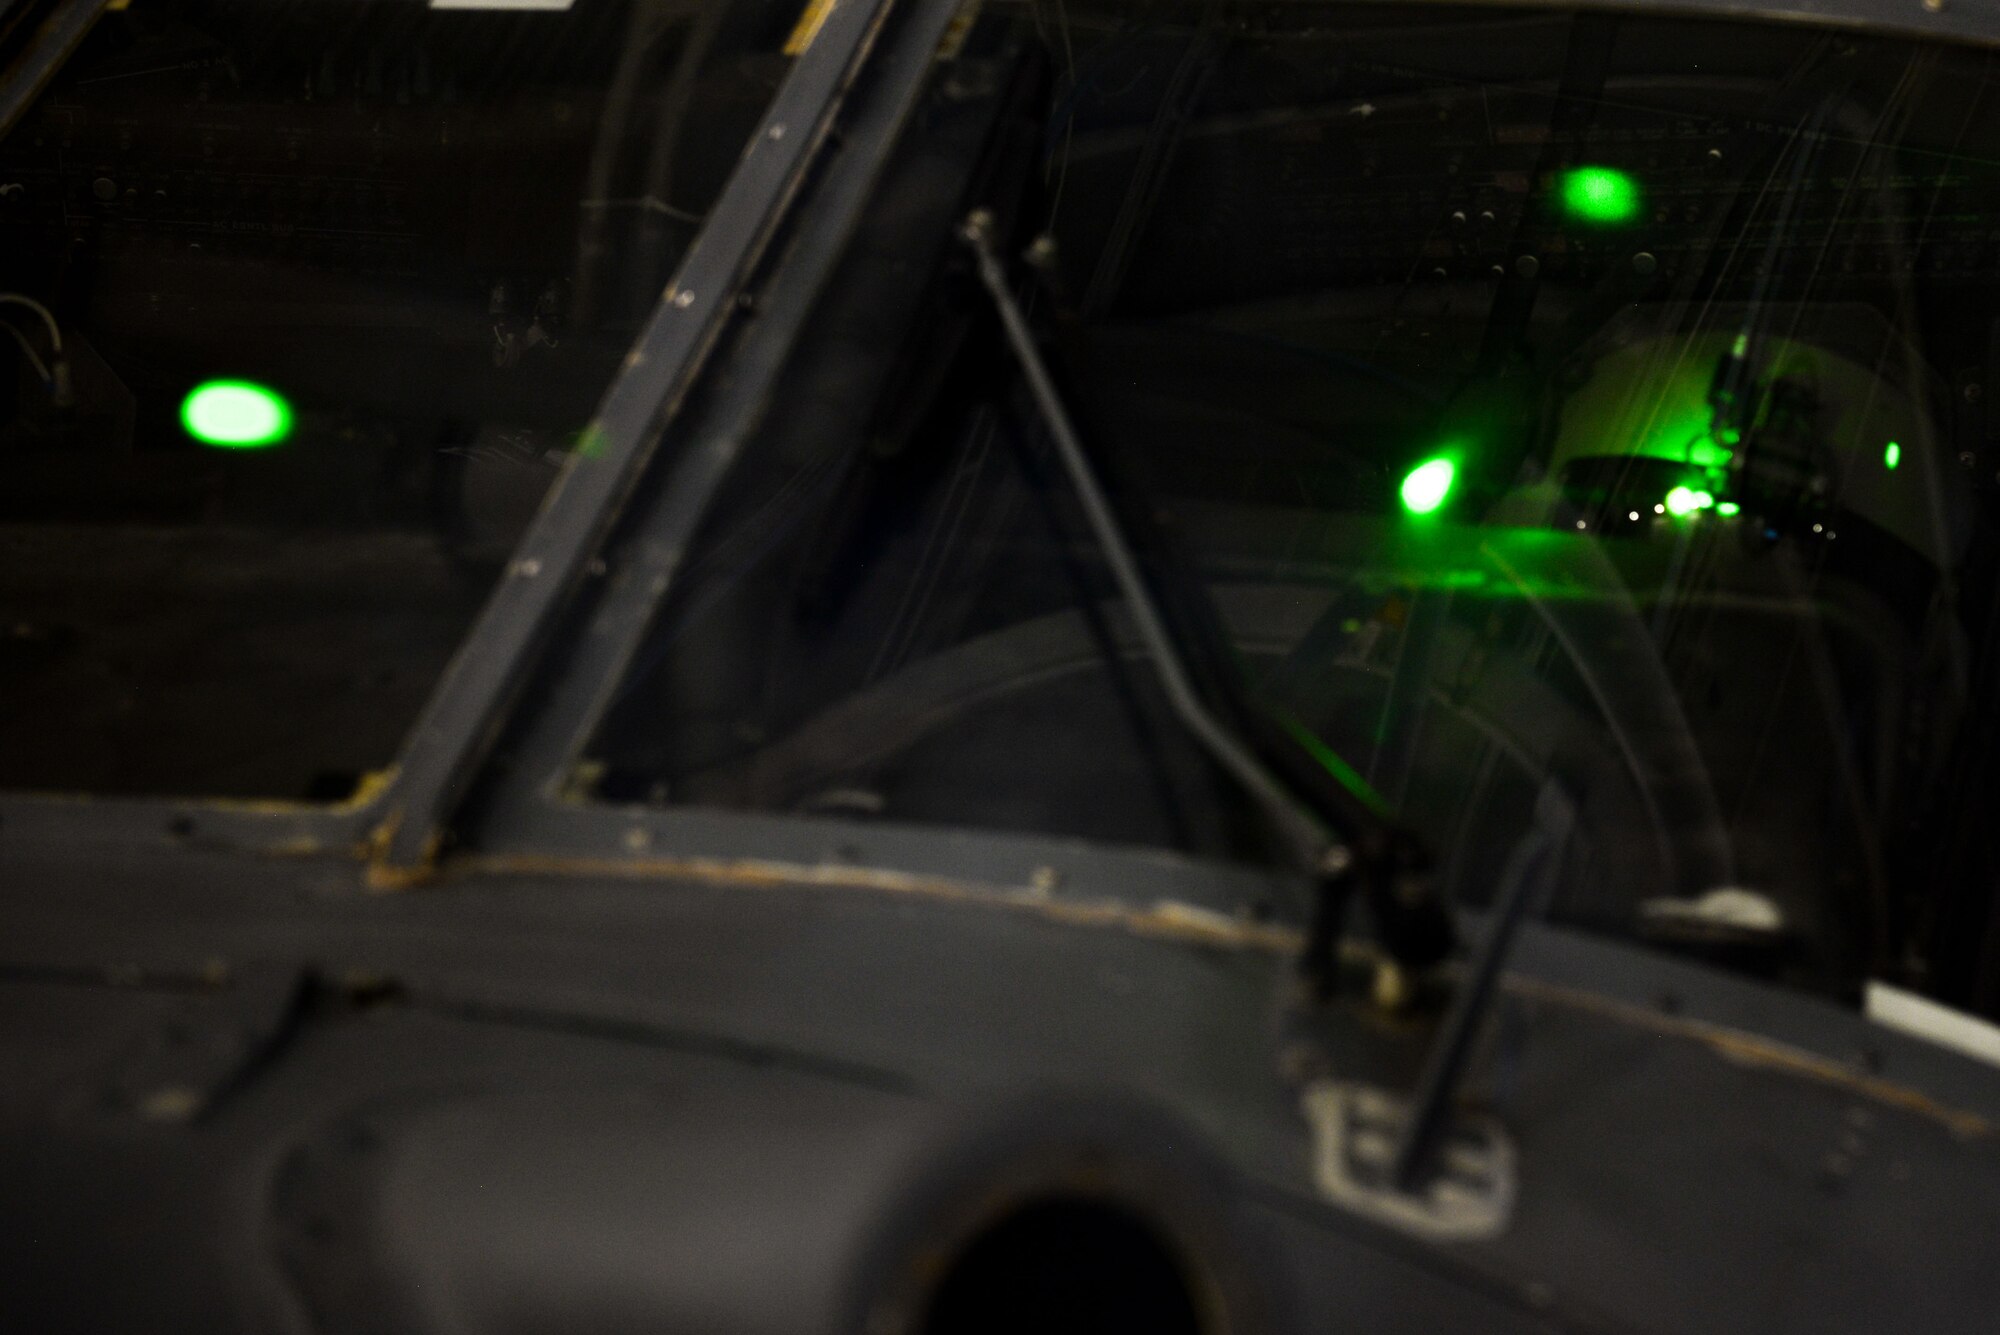 Laser on aircraft